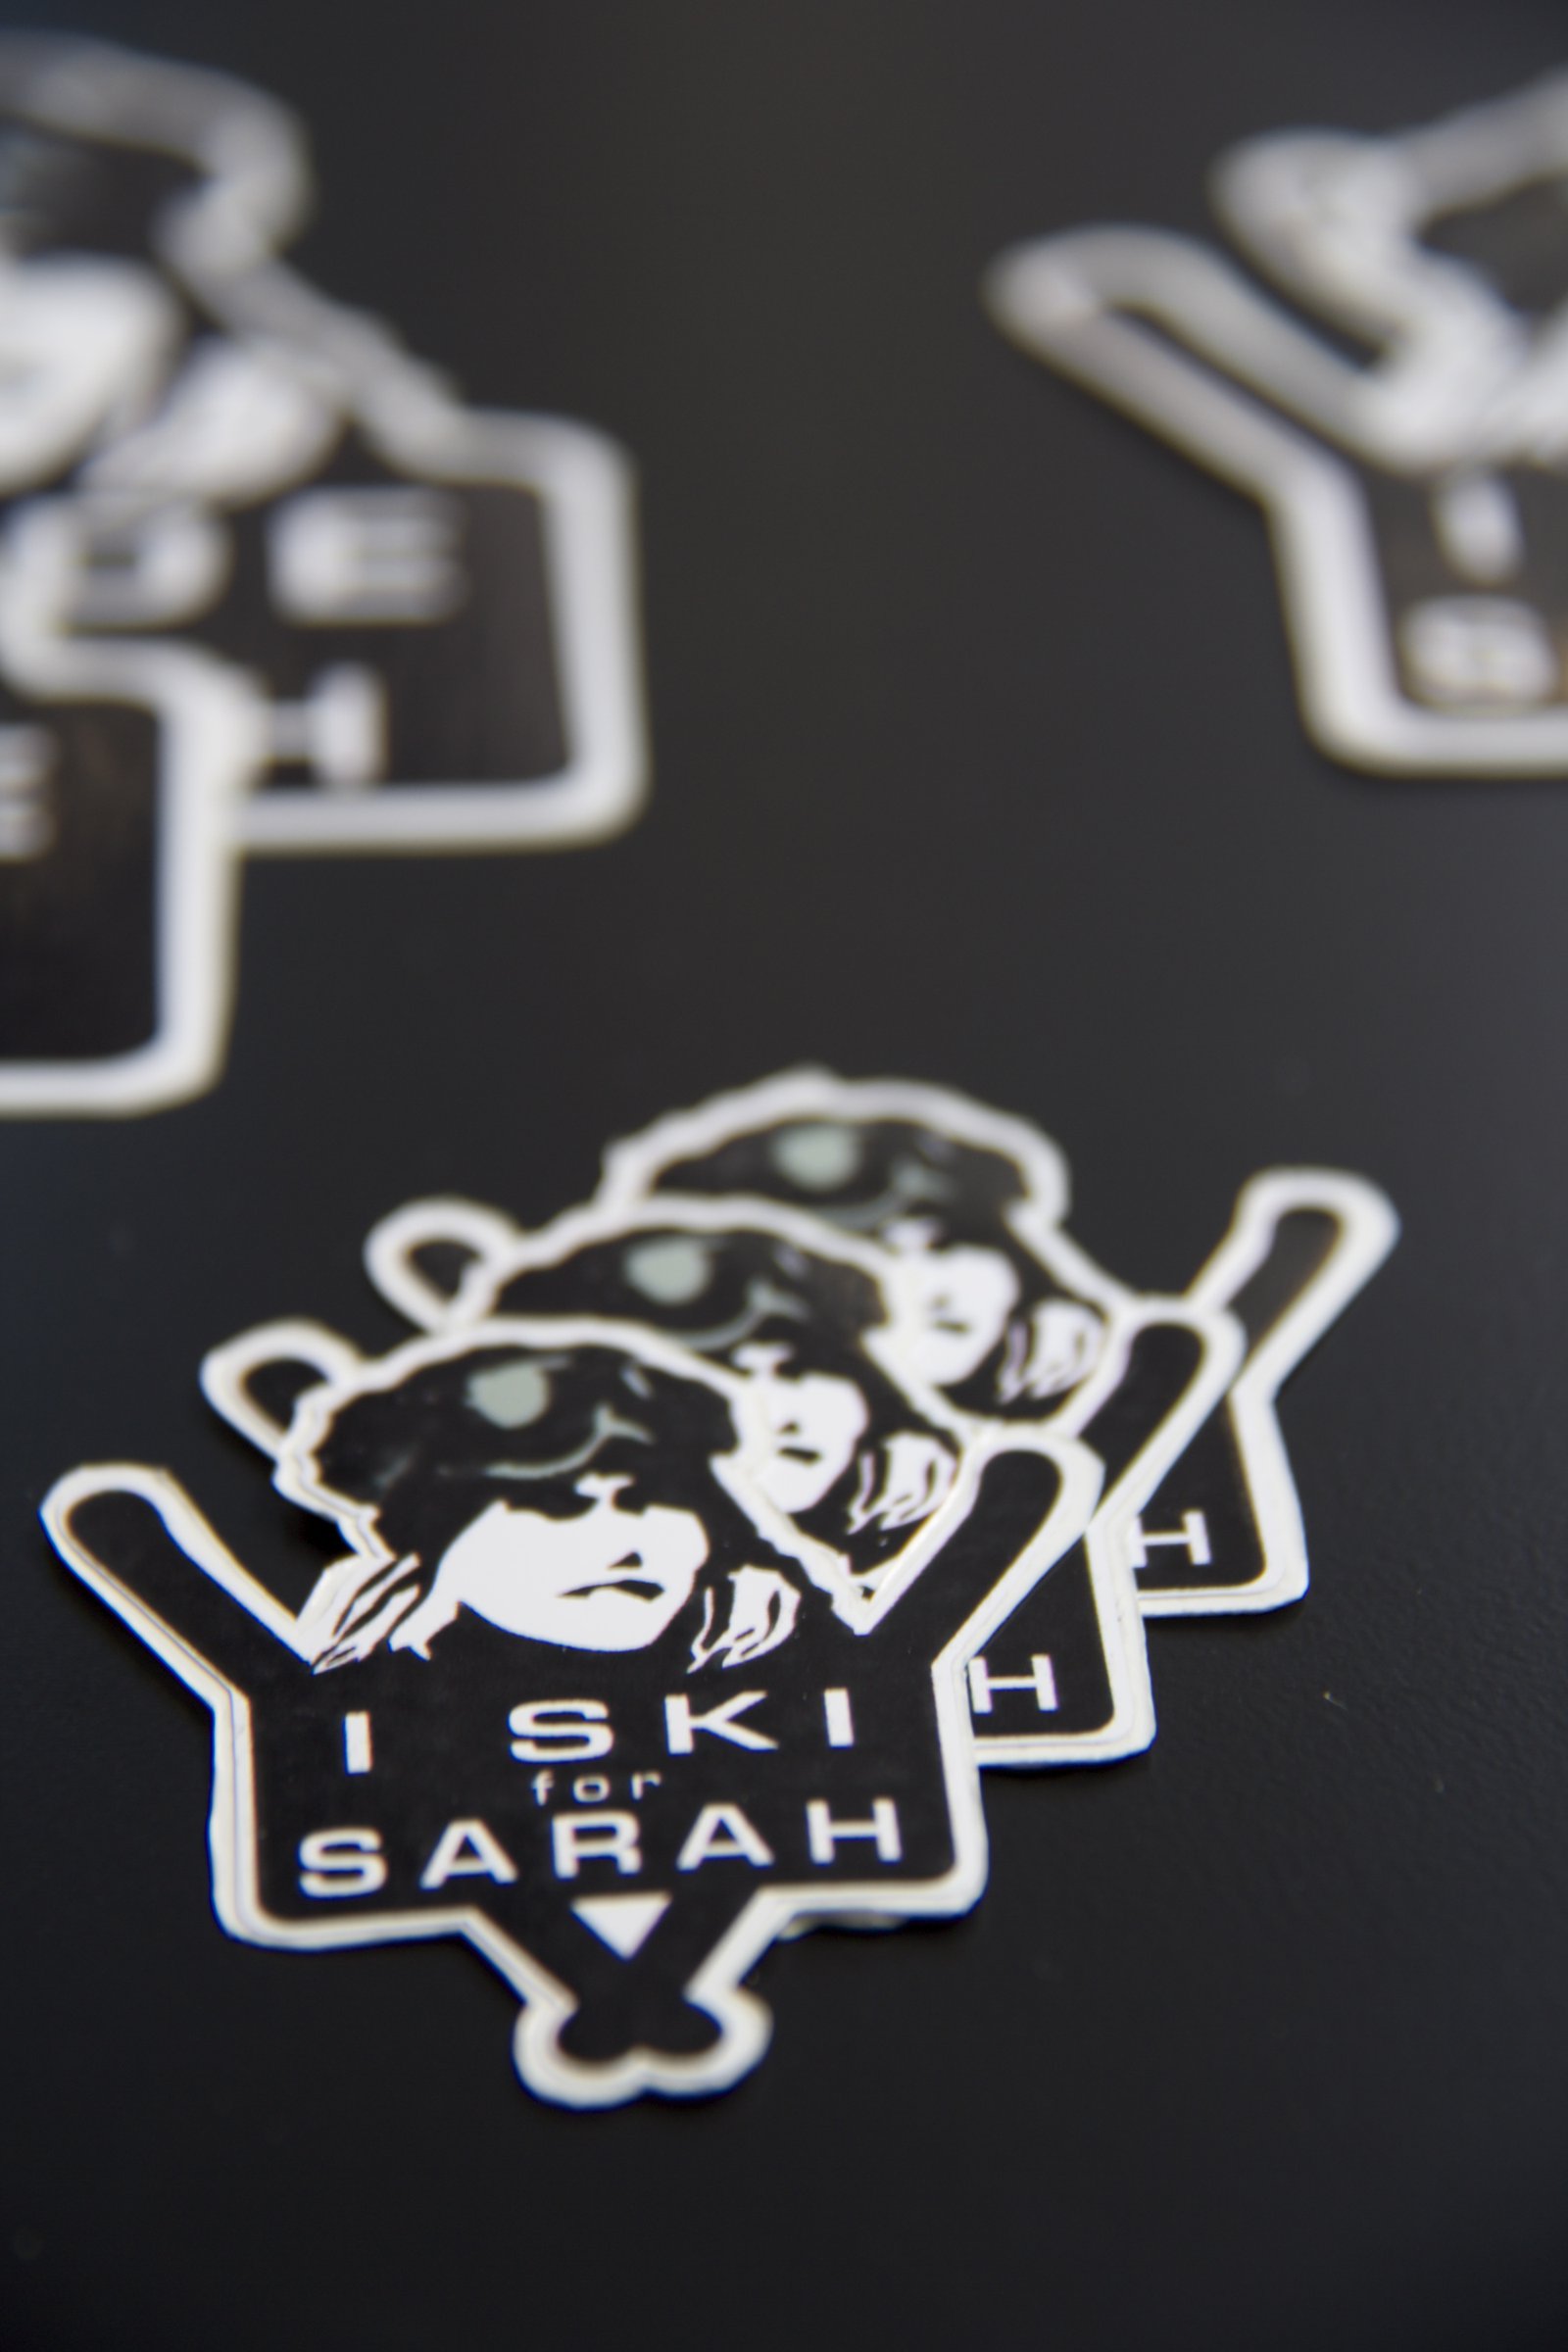 Stickers for Sarah